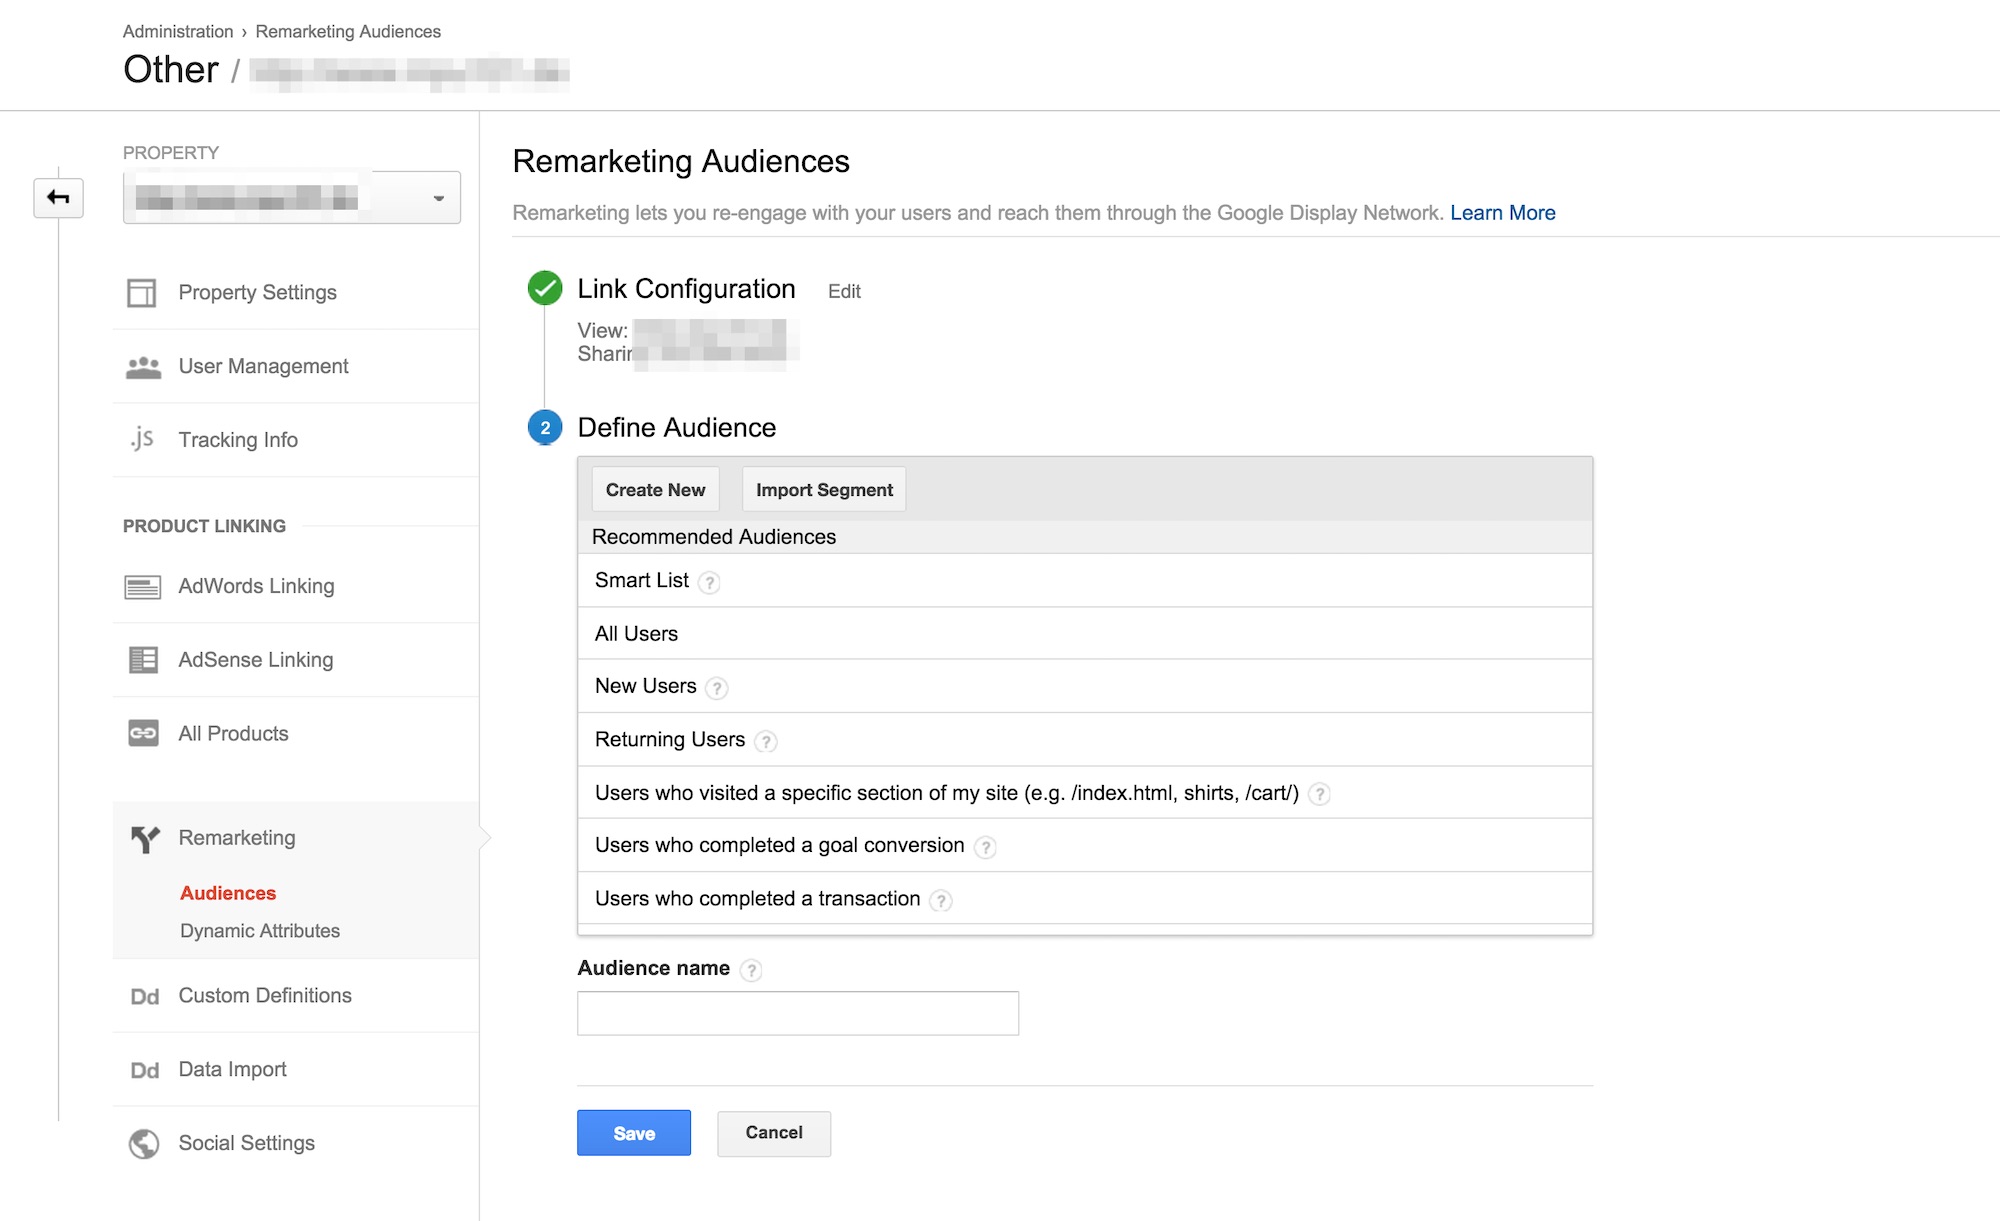 What is Not A Benefit of Google Analytics Remarketing